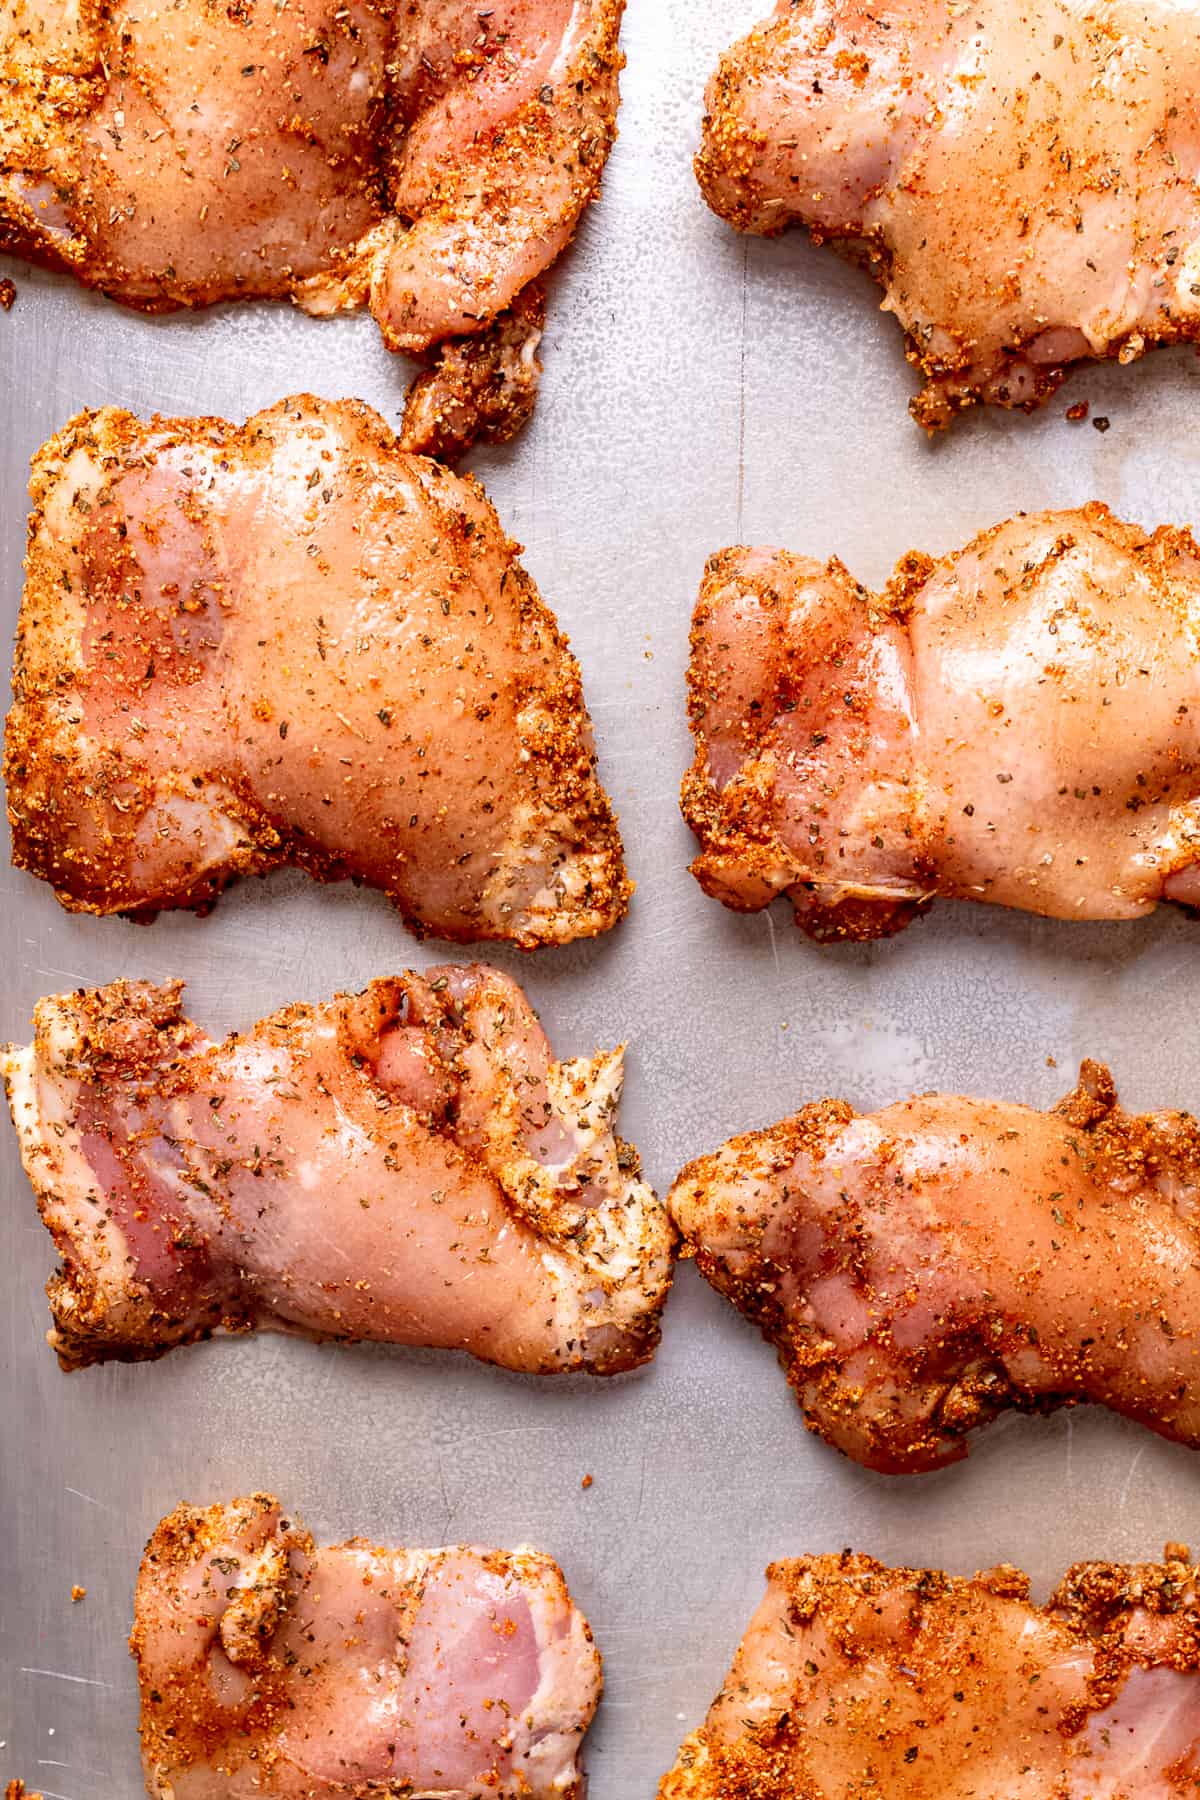 Spice-rubbed chicken thighs on a baking tray.